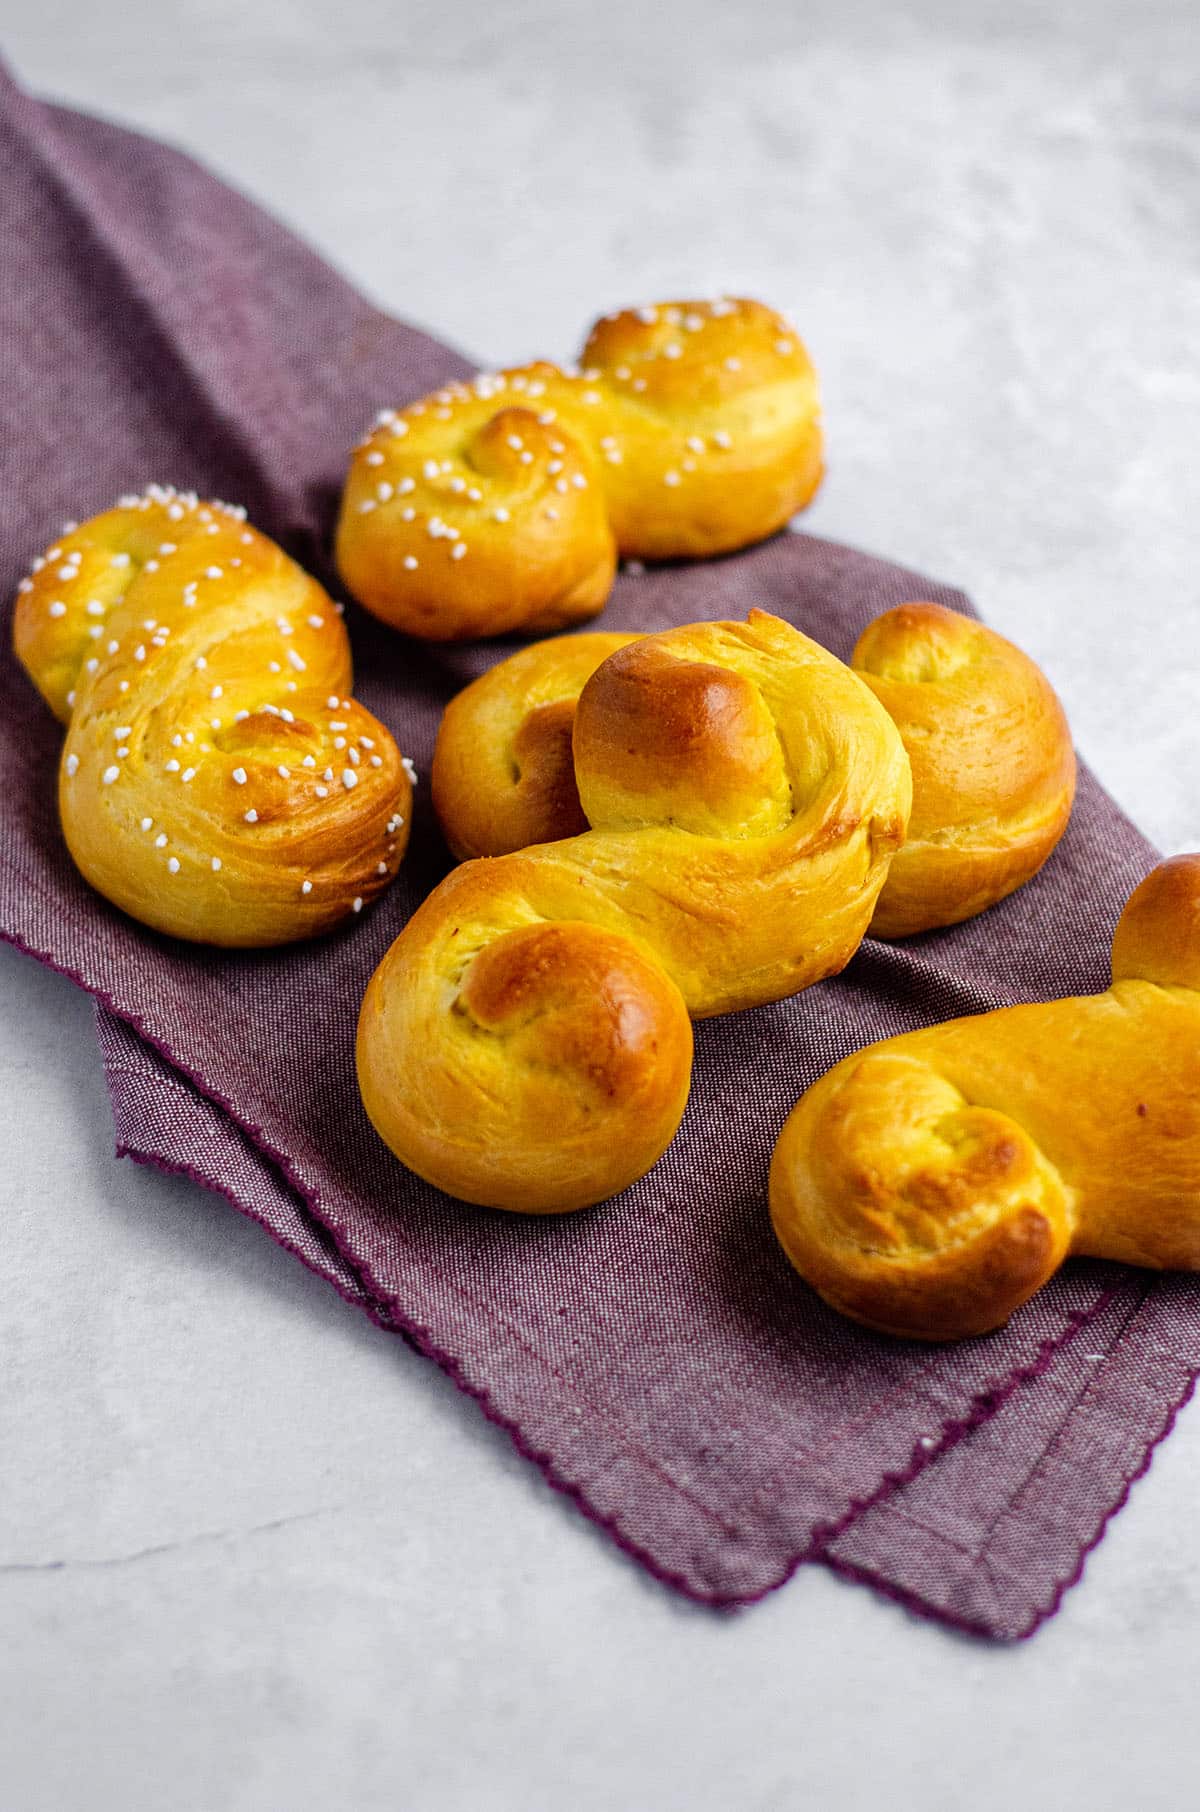 Traditional soft and fluffy Swedish holiday buns infused with saffron. via @frshaprilflours